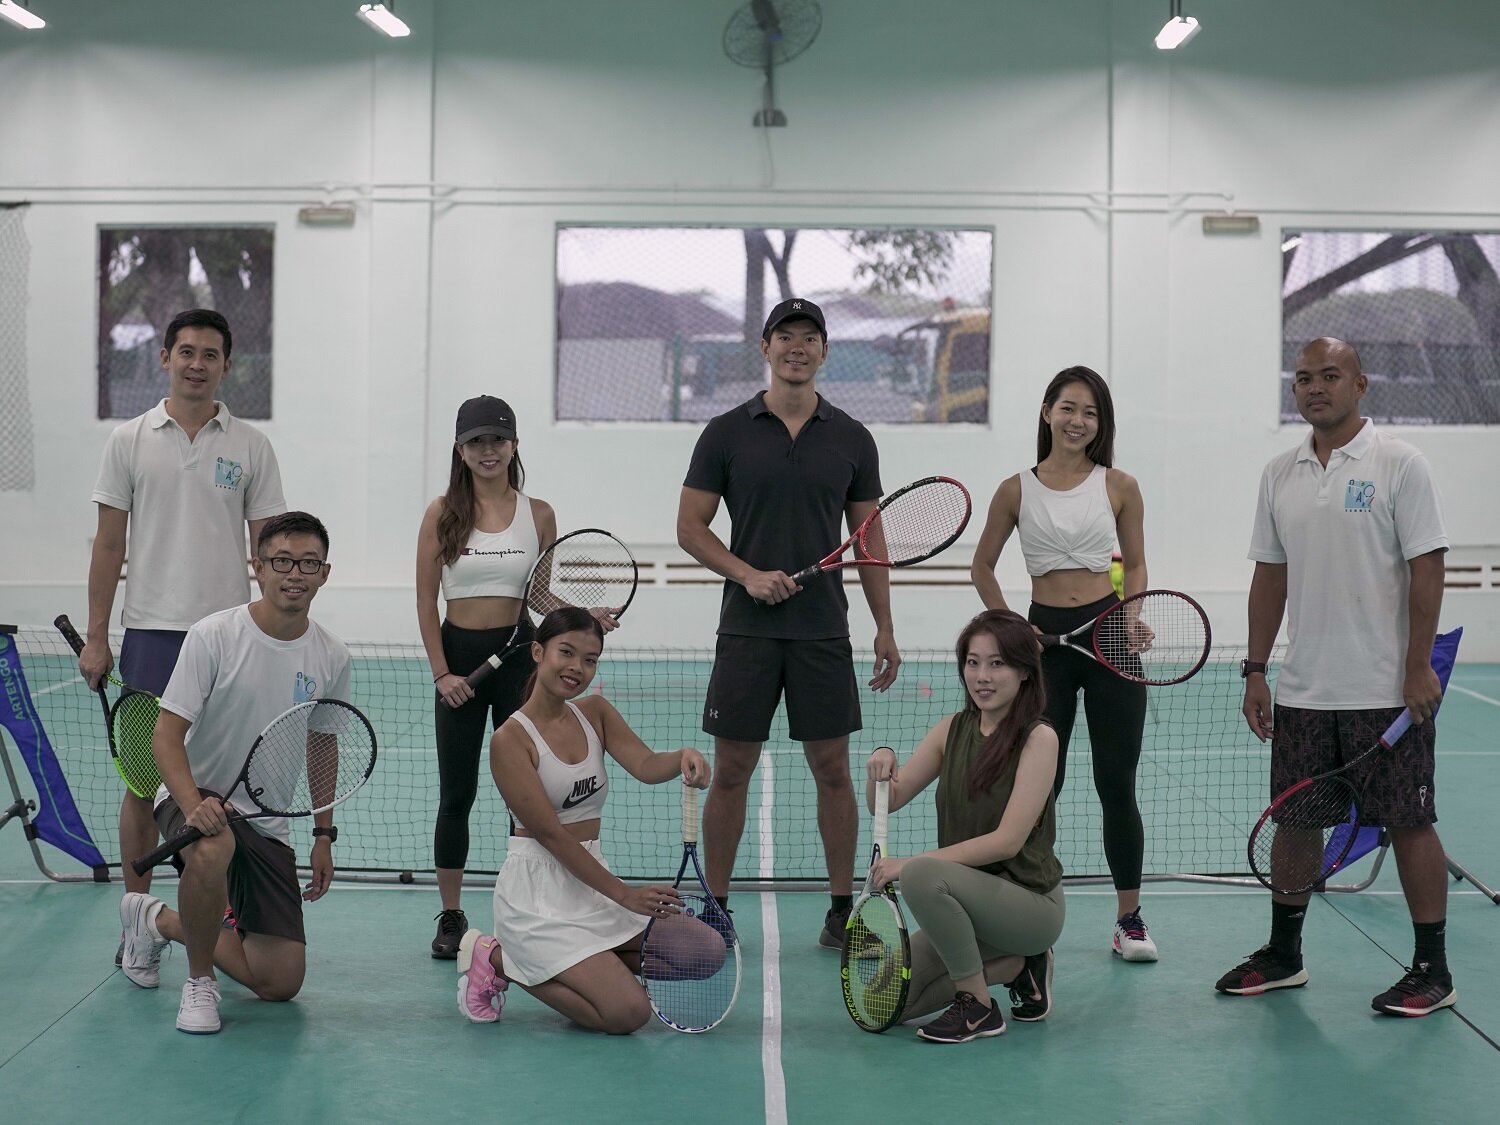 Tennis-Lessons-Singapore-Group-Red-Quarters.jpg